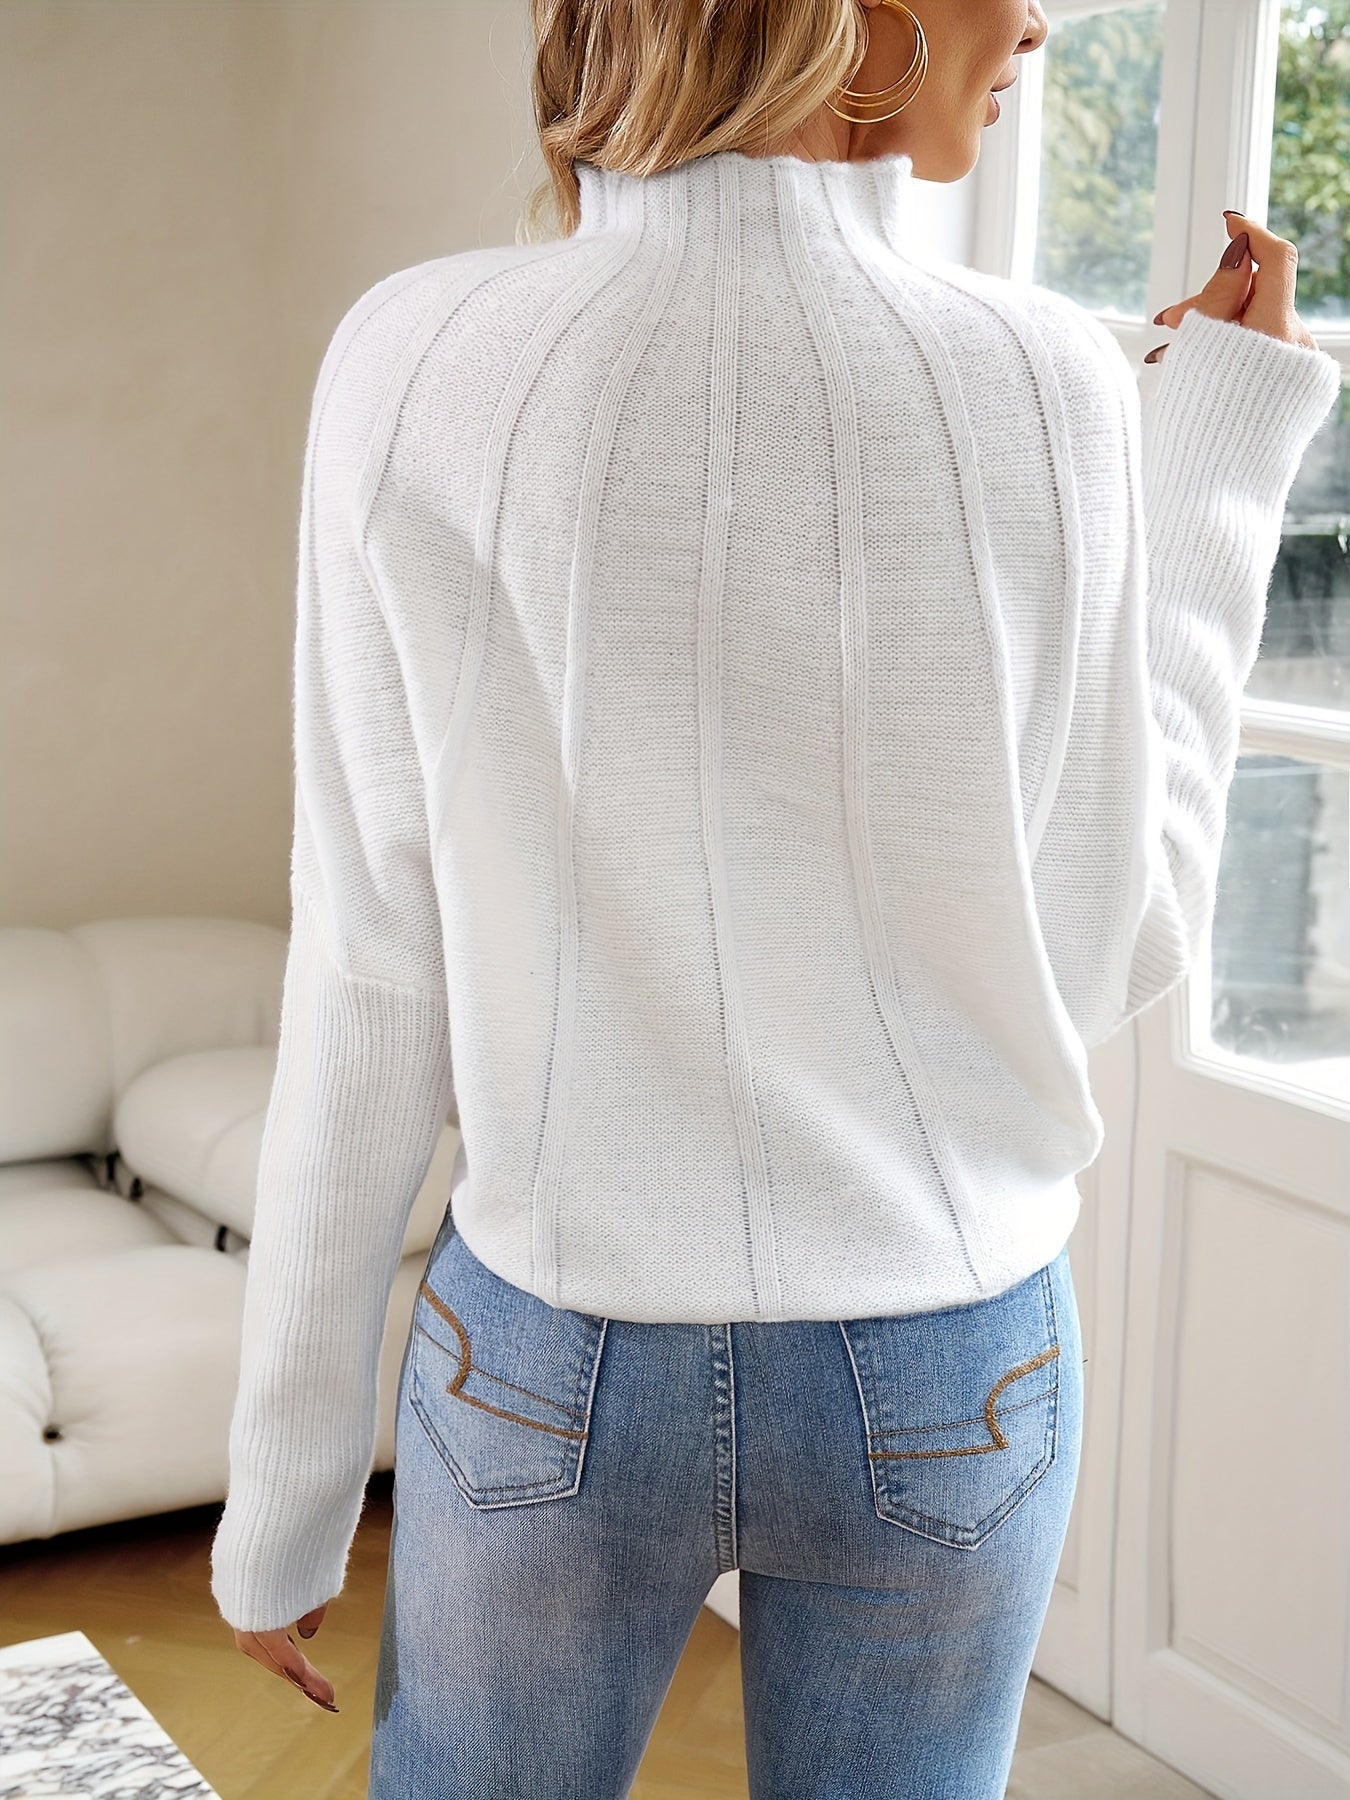 Antmvs Mock Neck Batwing Sleeve Sweater, Elegant Solid Loose Sweater For Fall & Winter, Women's Clothing